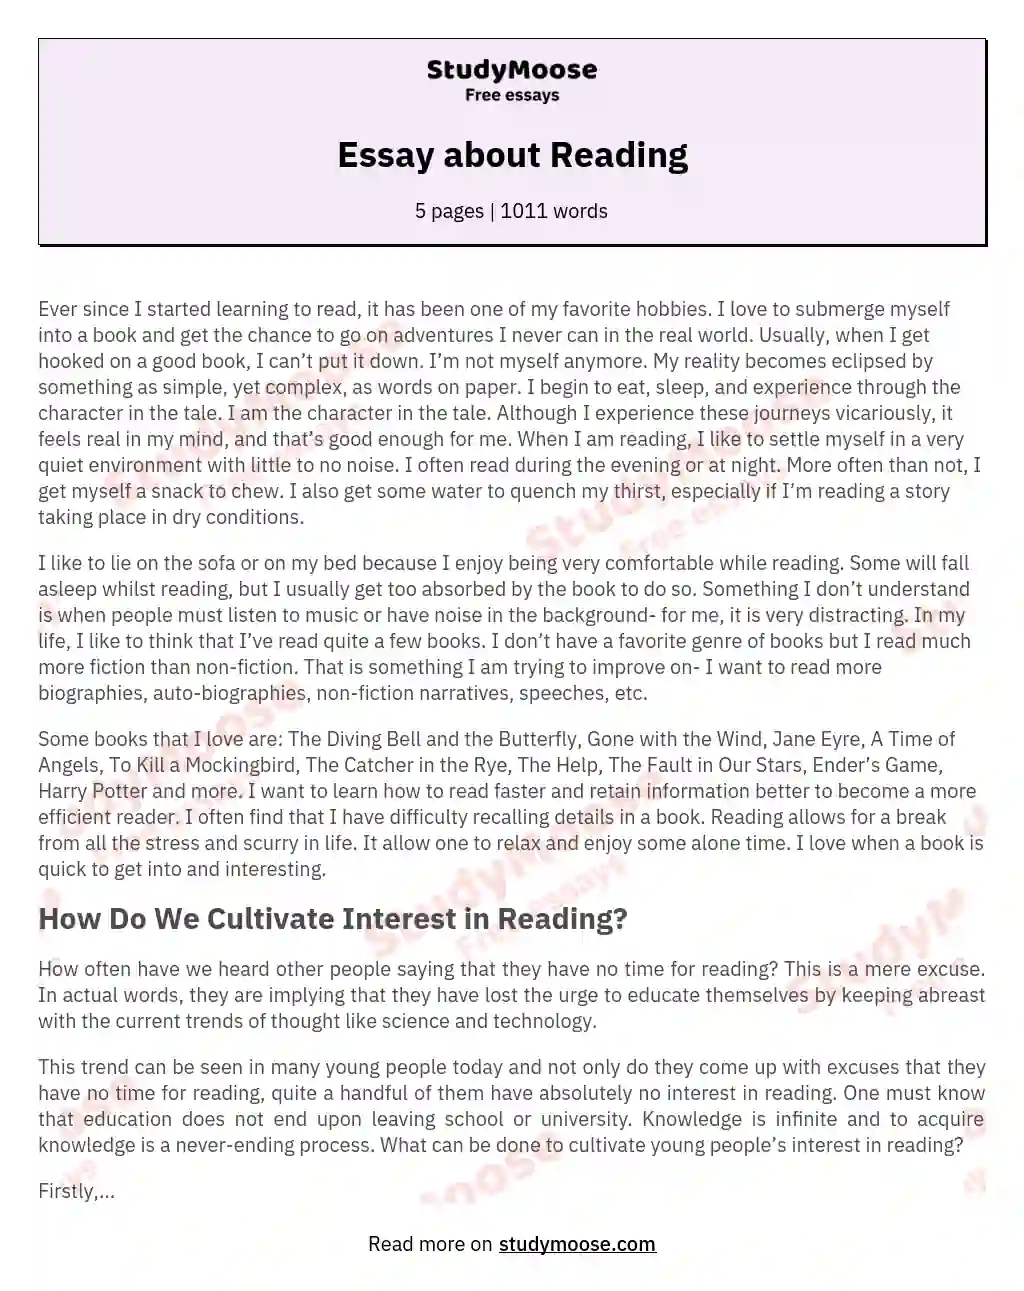 Essay about Reading